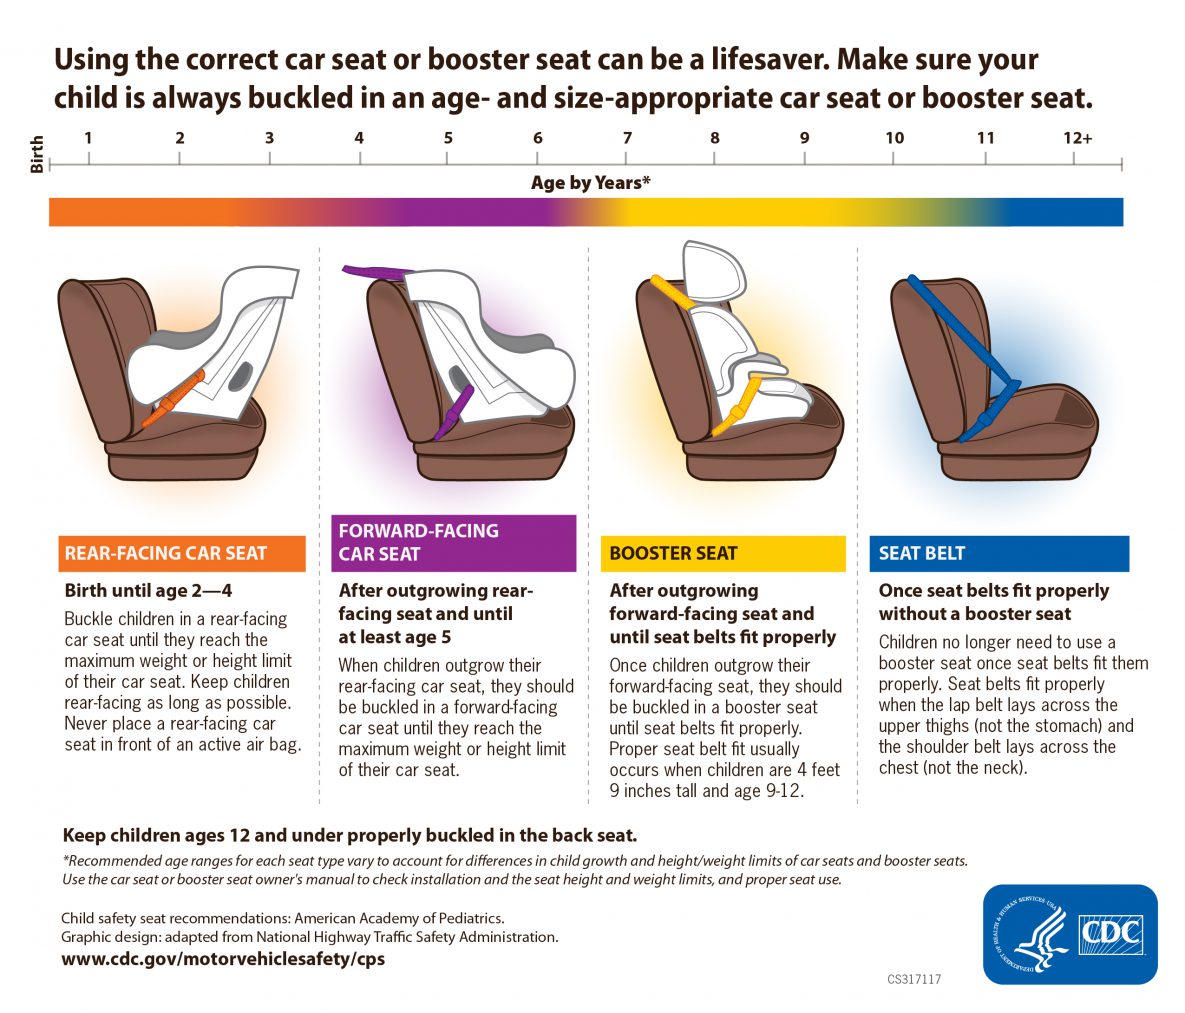 Washington Dc Car Seat Laws Regan, What Are The Requirements For Child Car Seats